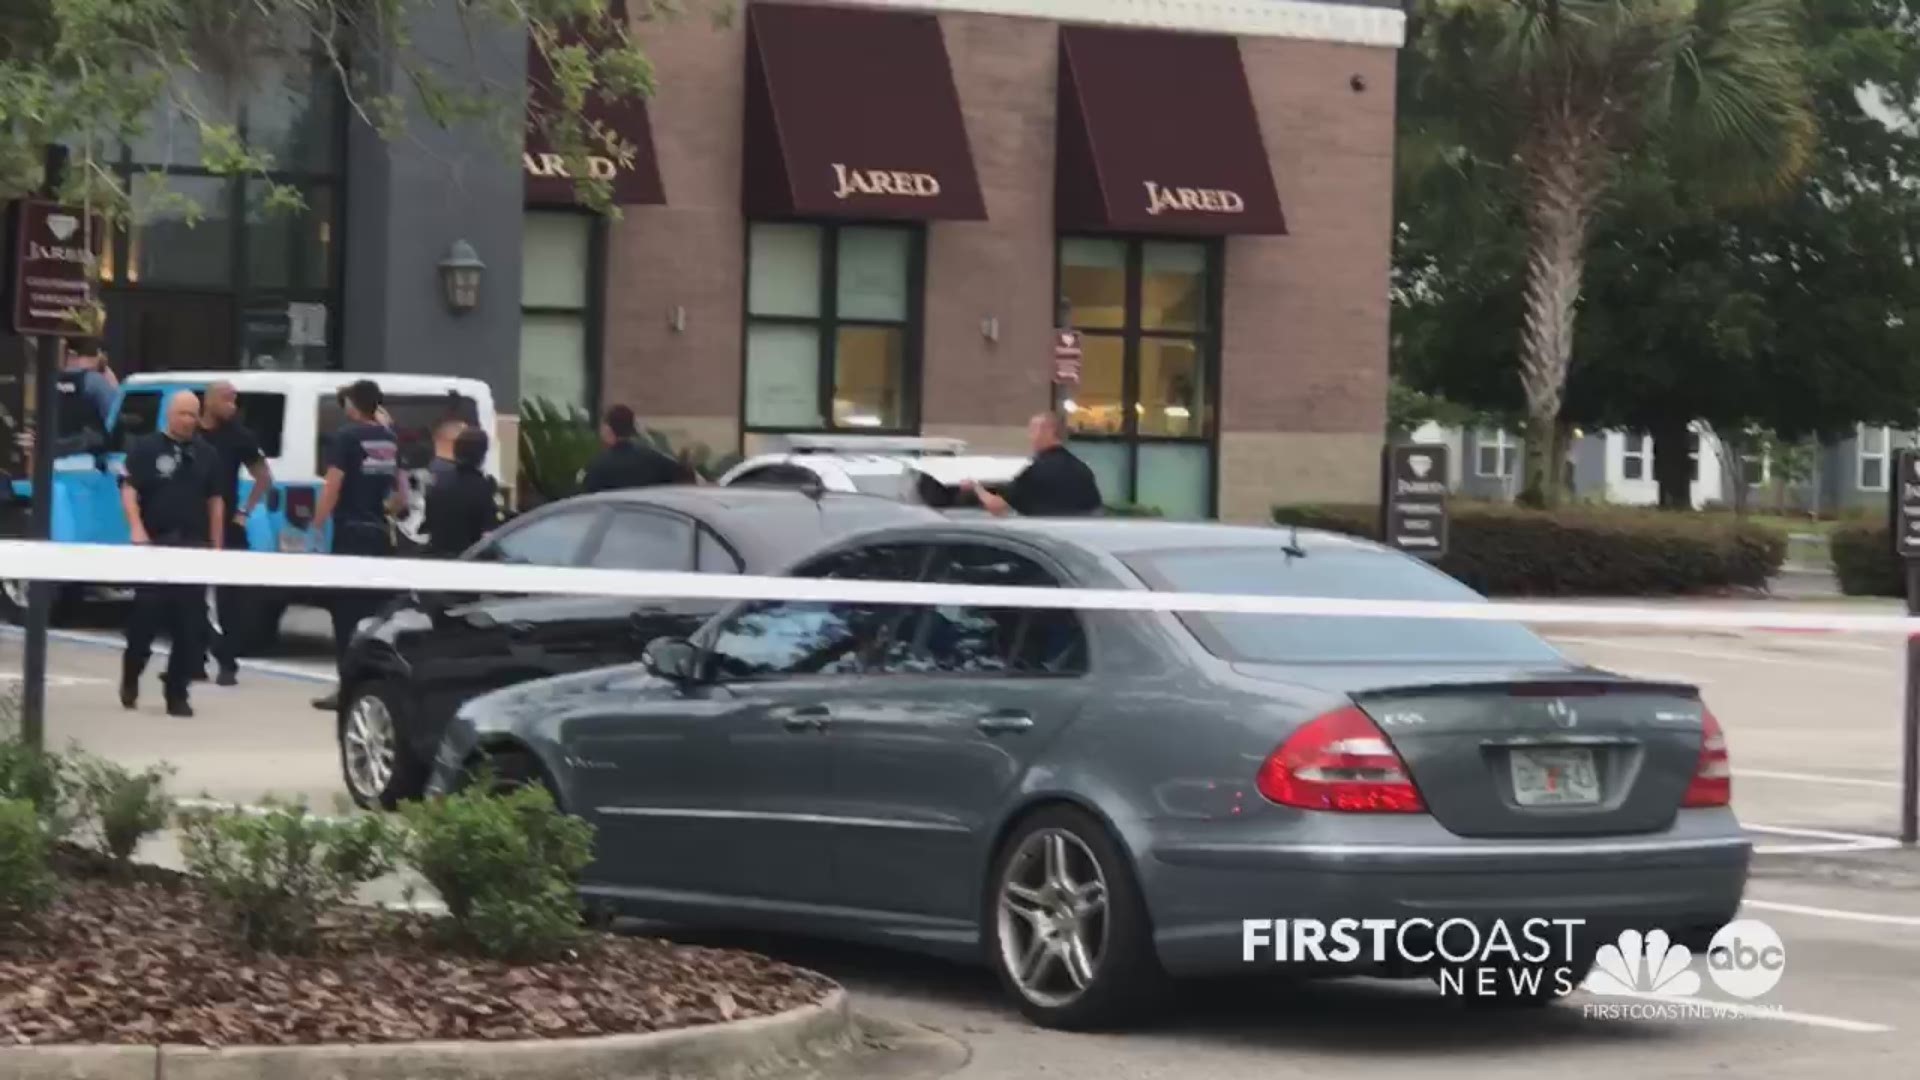 Police tape is surrounding the Jared jewelry store in Town Center on the Southside on Tuesday after witness said an armed robbery took place at the business.